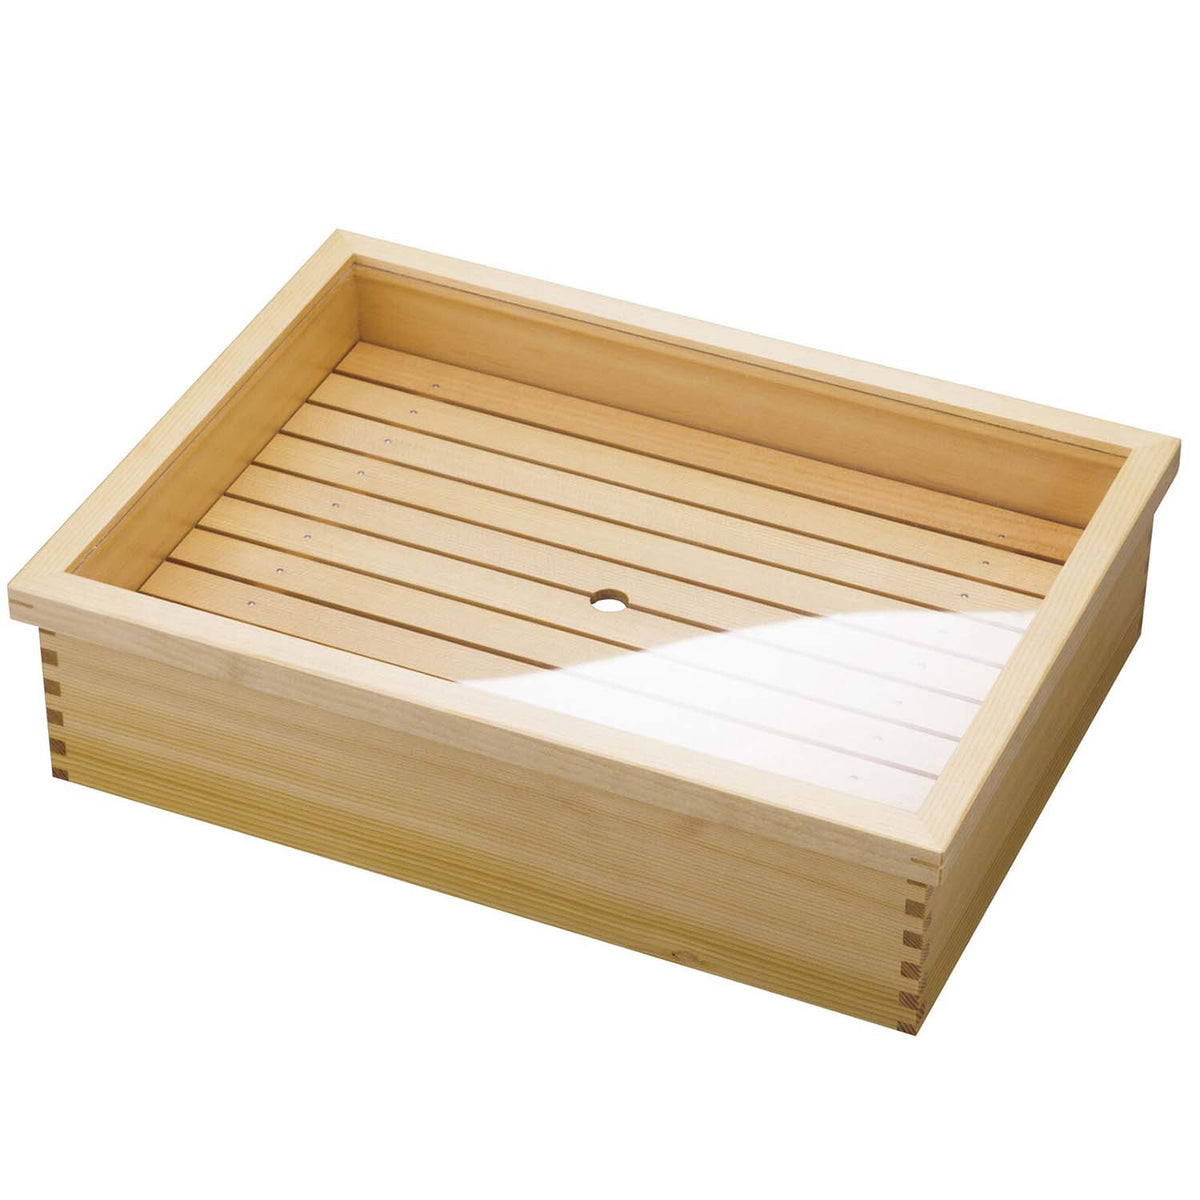 Yamacoh Wooden Sushi Neta Case with Stainlesss Steel Tray